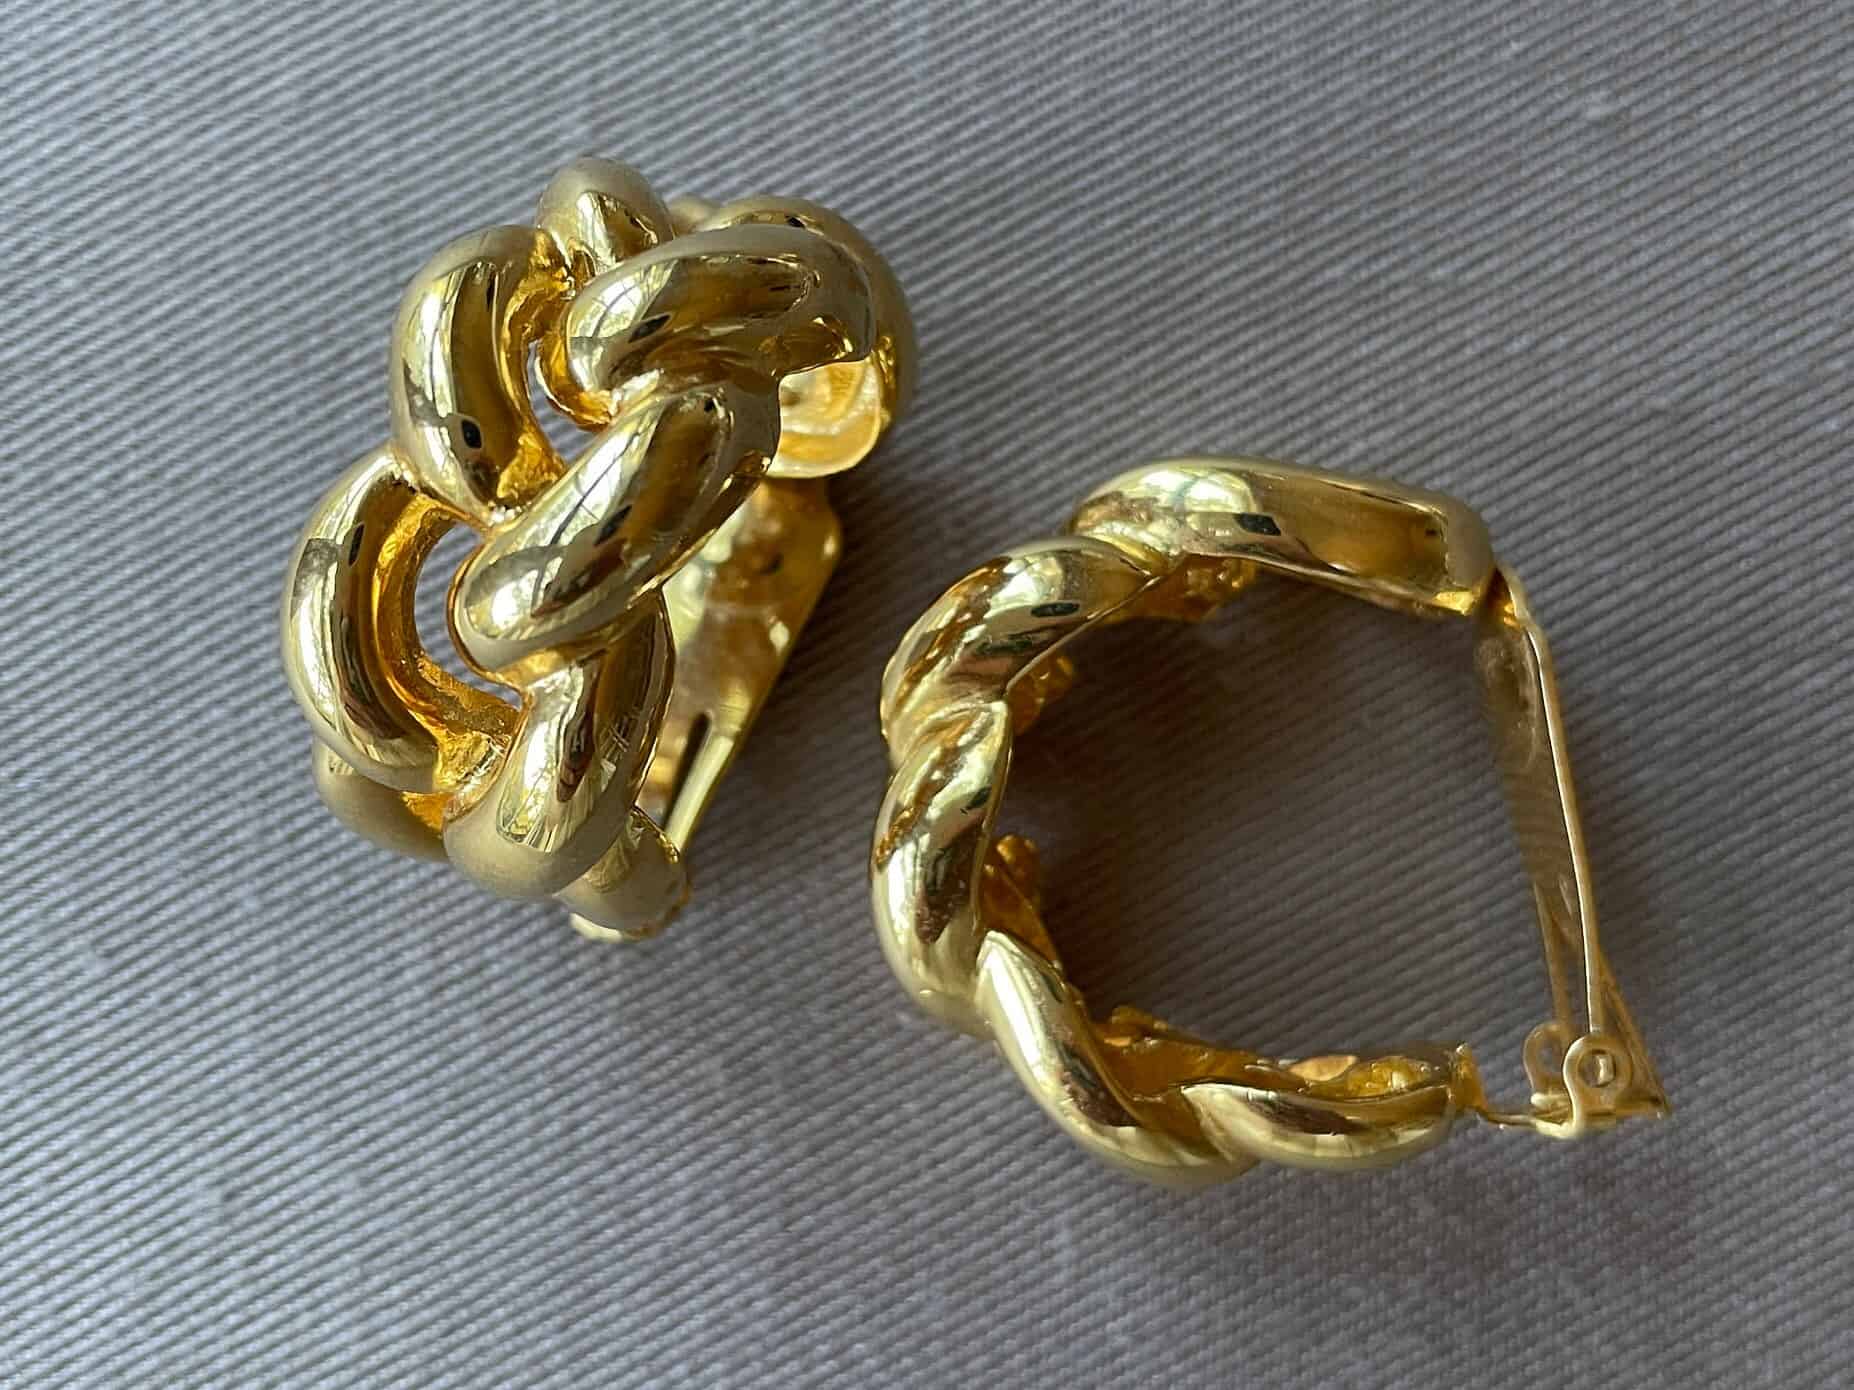 Details about   True Vintage Chunky 80s Statement Earrings Clip On Brushed Gold Thick Hoop Bin1 